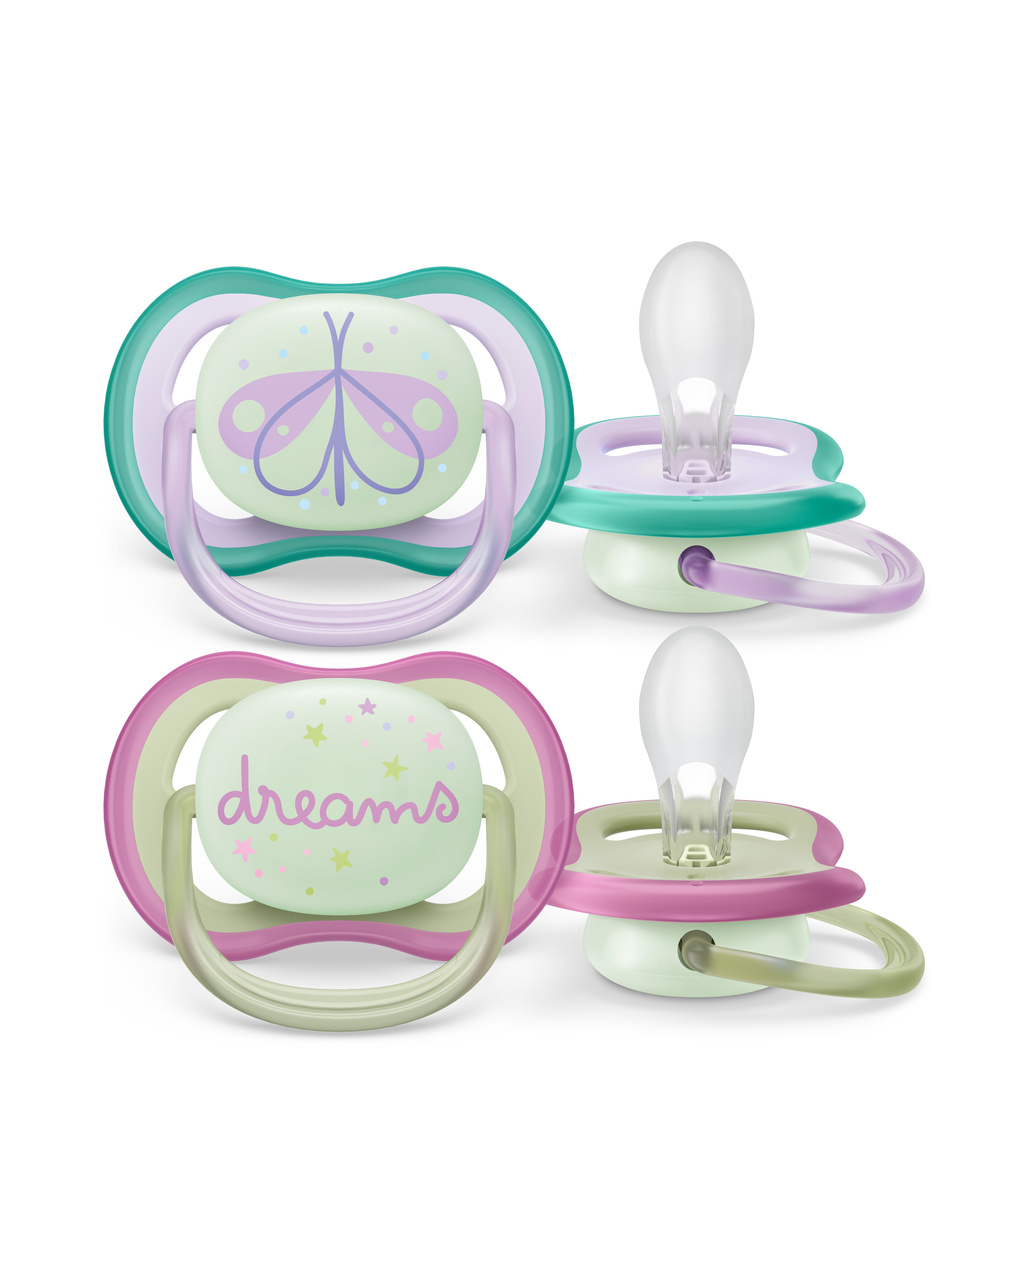 Philips Avent 2 Chupetes Decorados 0 A 6 Meses